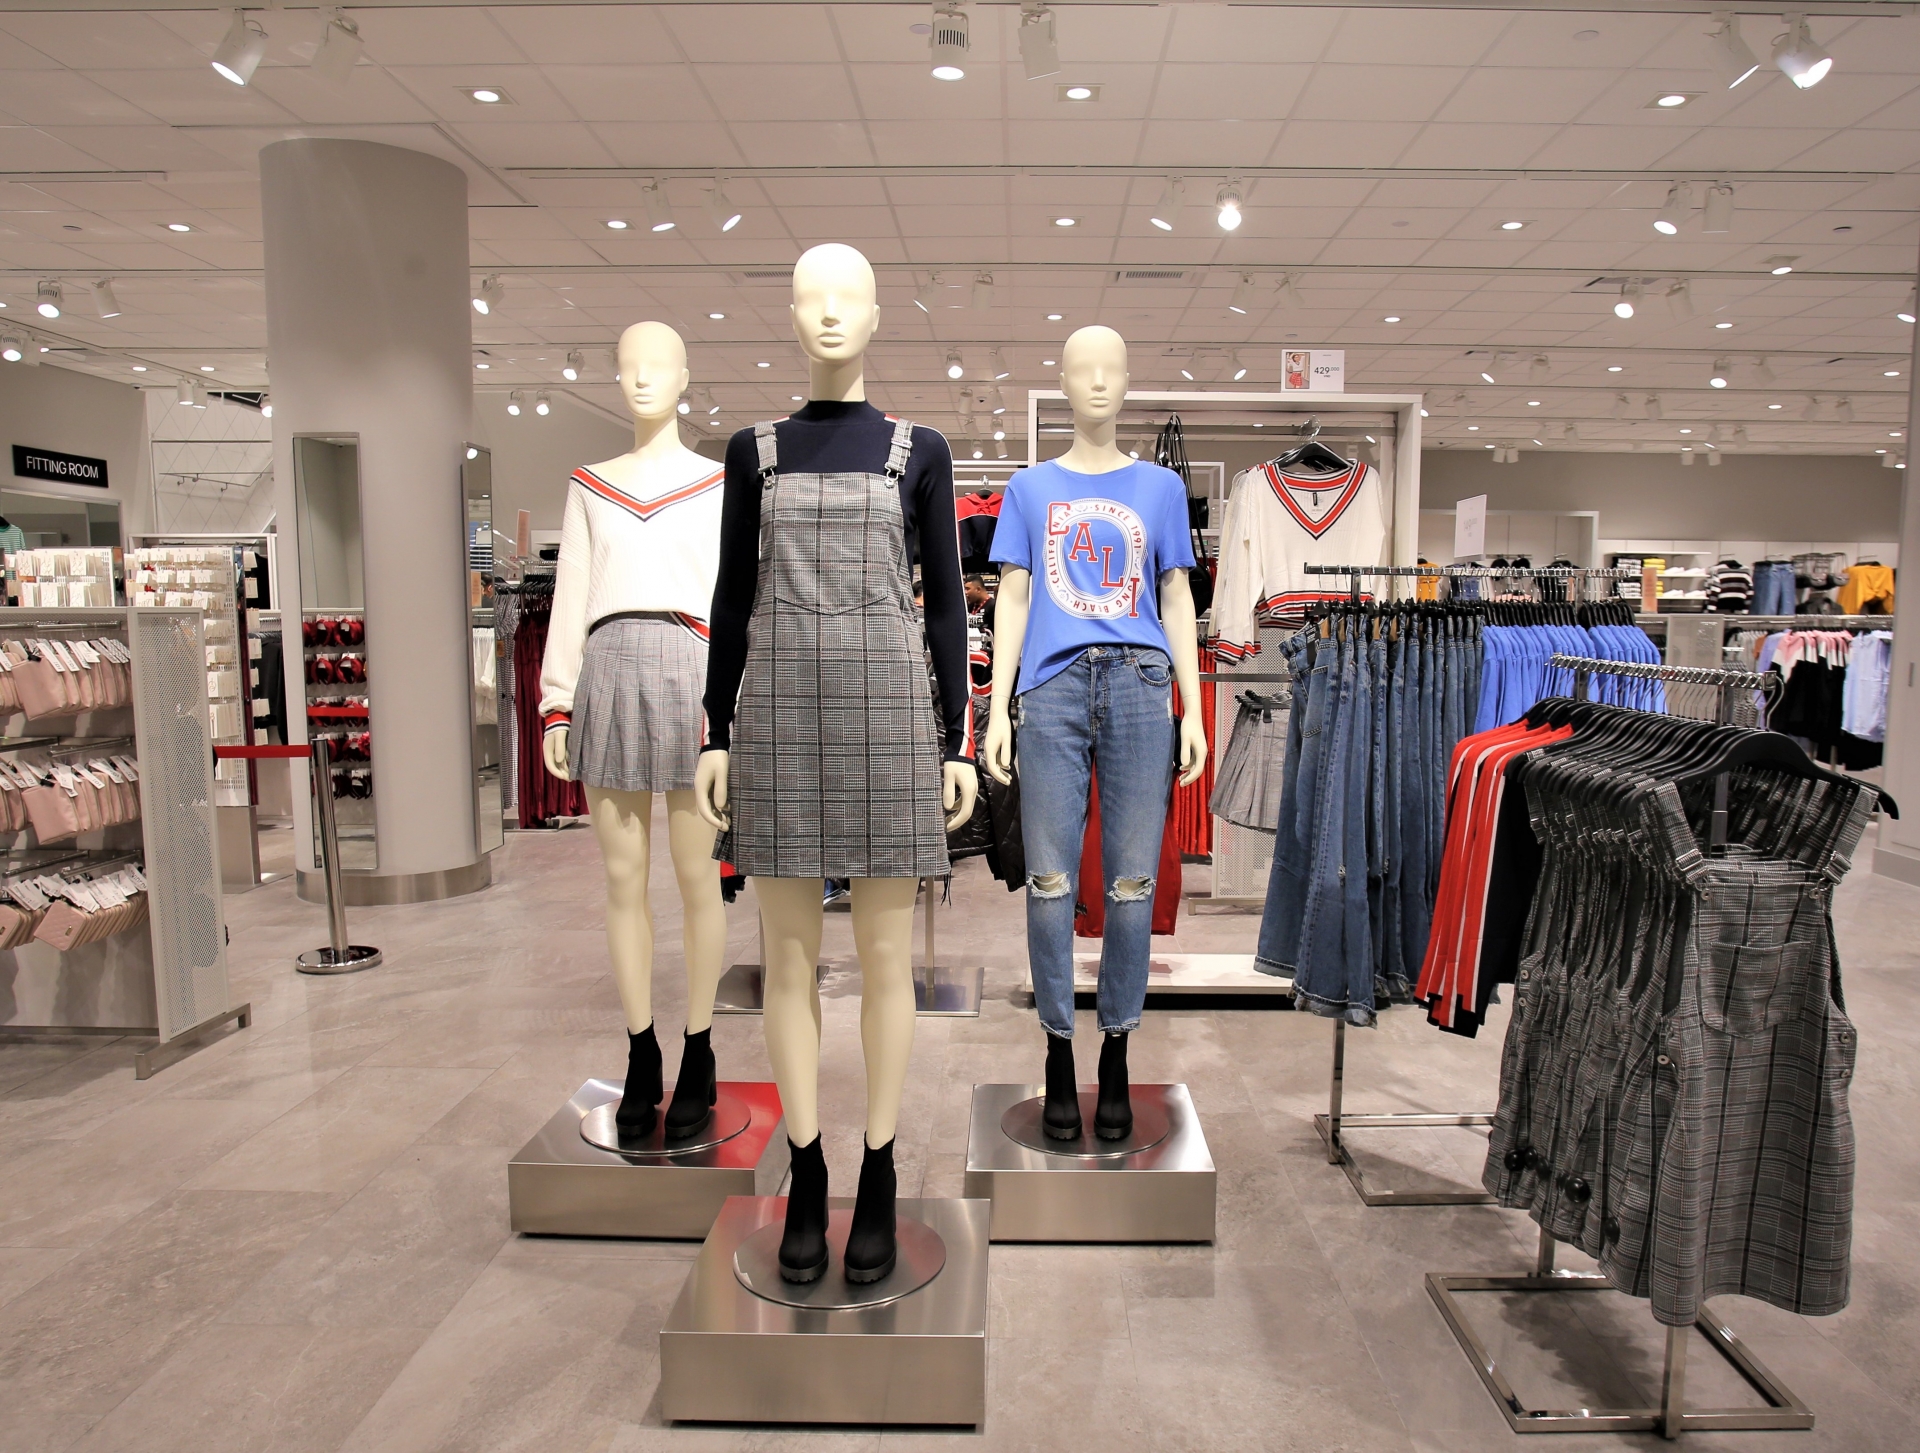 Is H&M unfit to pursue strategy to grow number of stores?